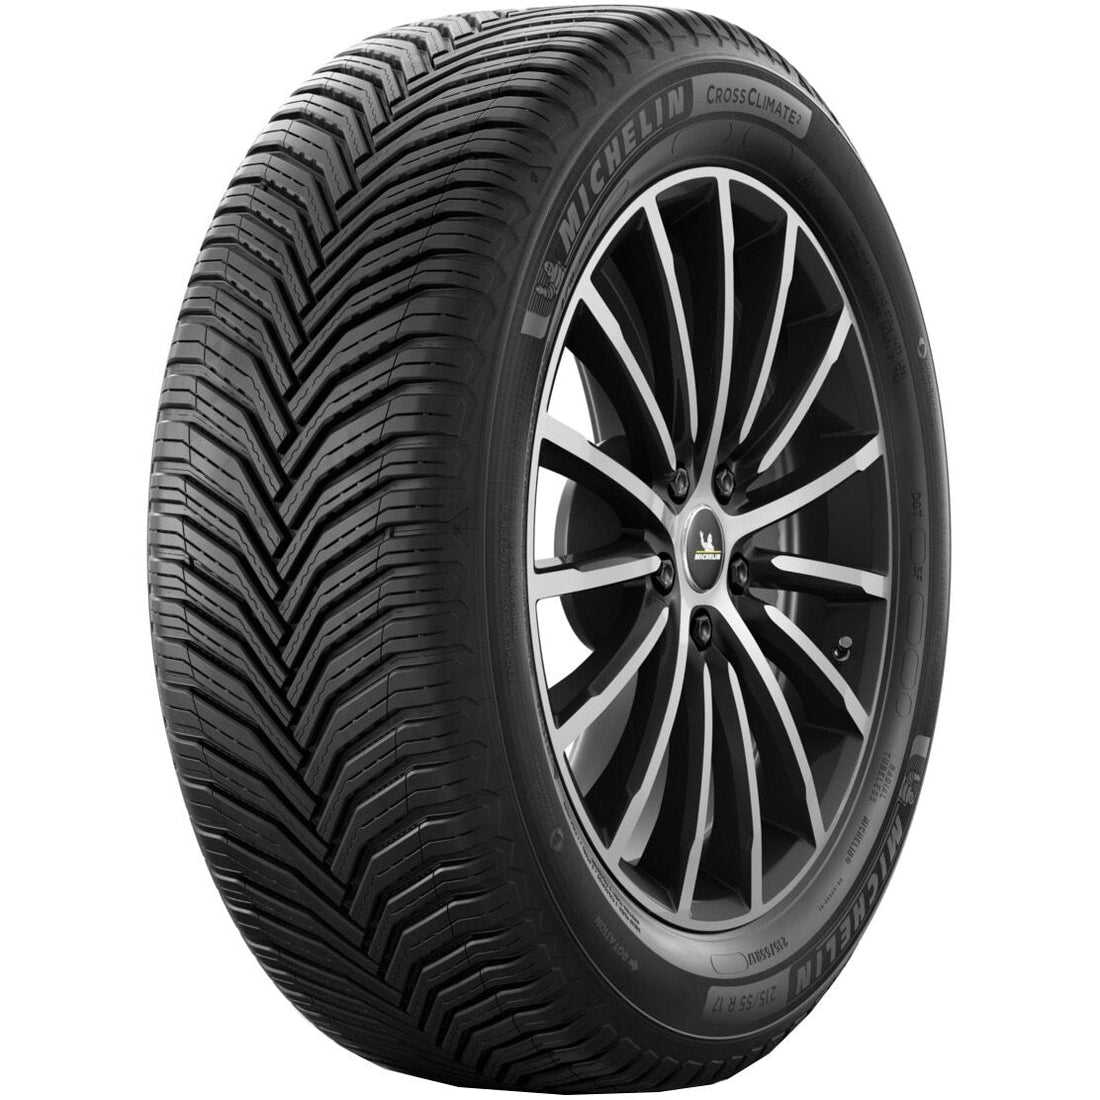 Anvelope All-season Michelin Crossclimate 2 235/45R17 97 Y Anvelux